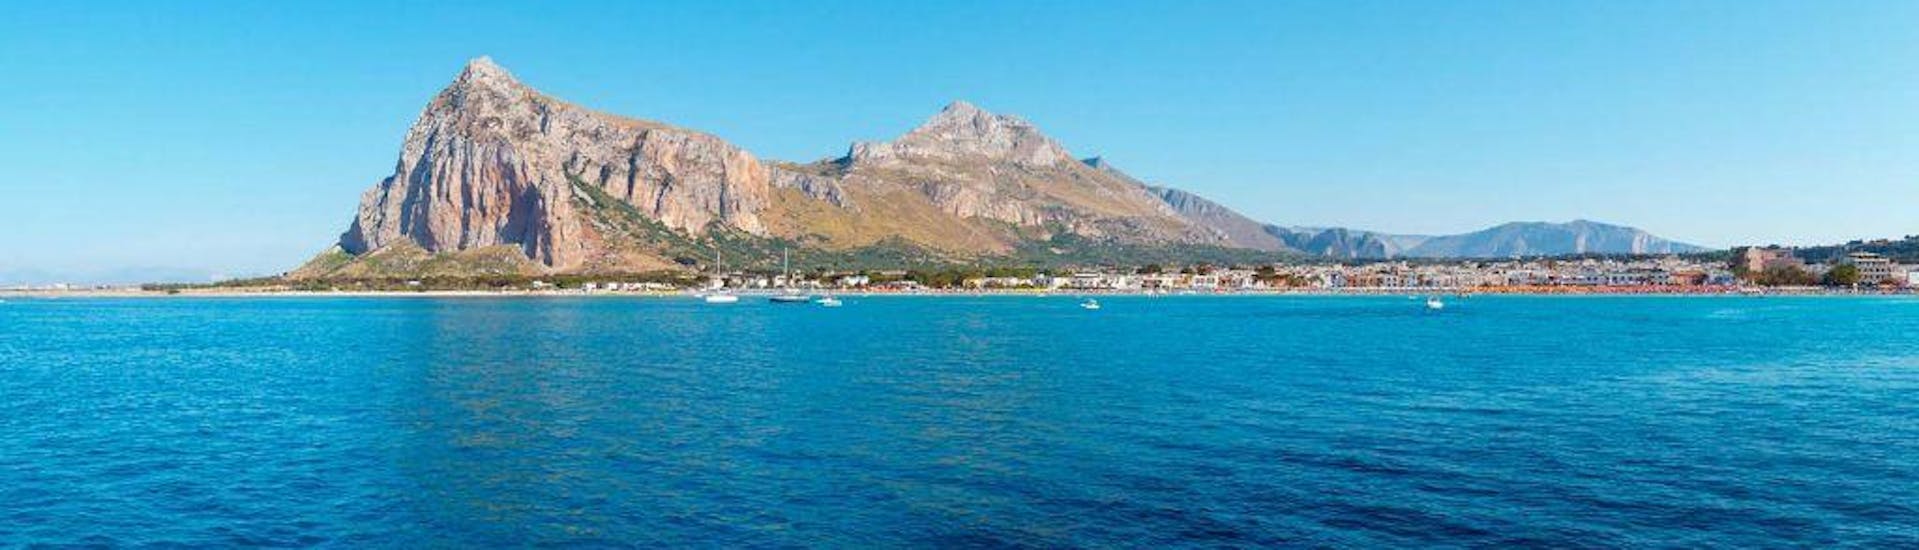 A view from one of Bluedream San Vito Lo Capo's trips.